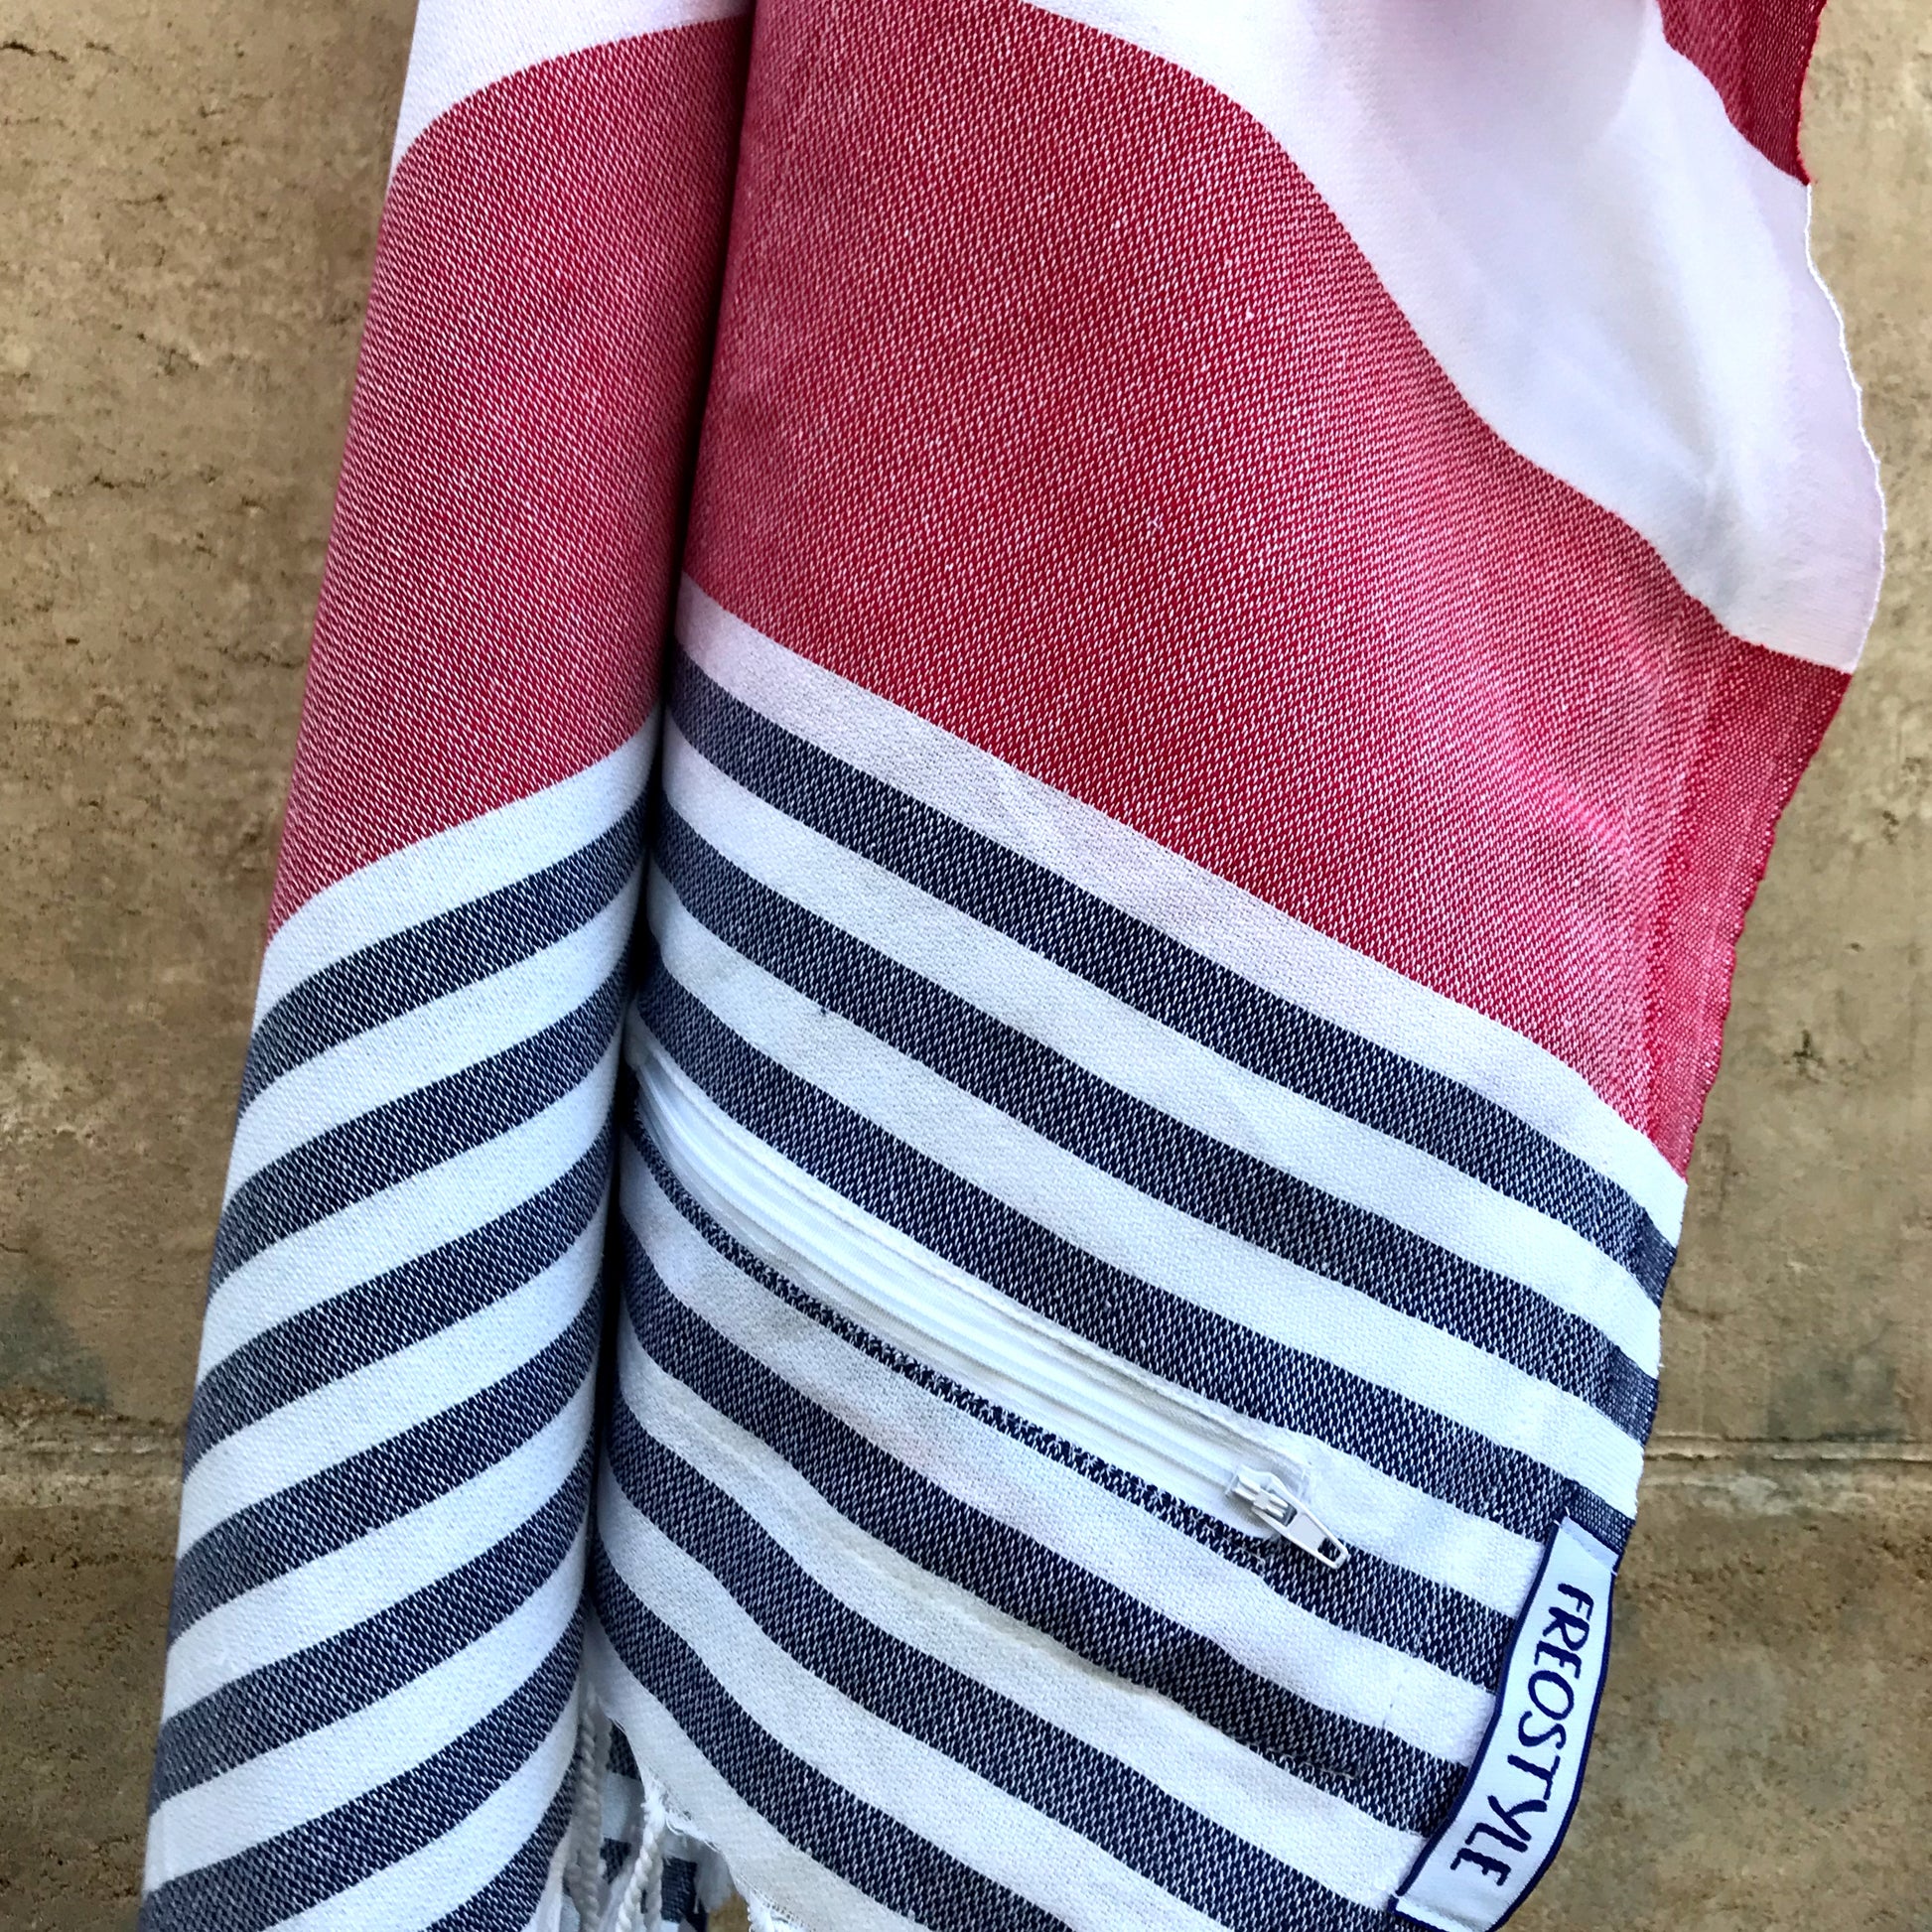 Antibes Turkish Towel with Pockets has a bold red feature stripe for a classic nautical feel